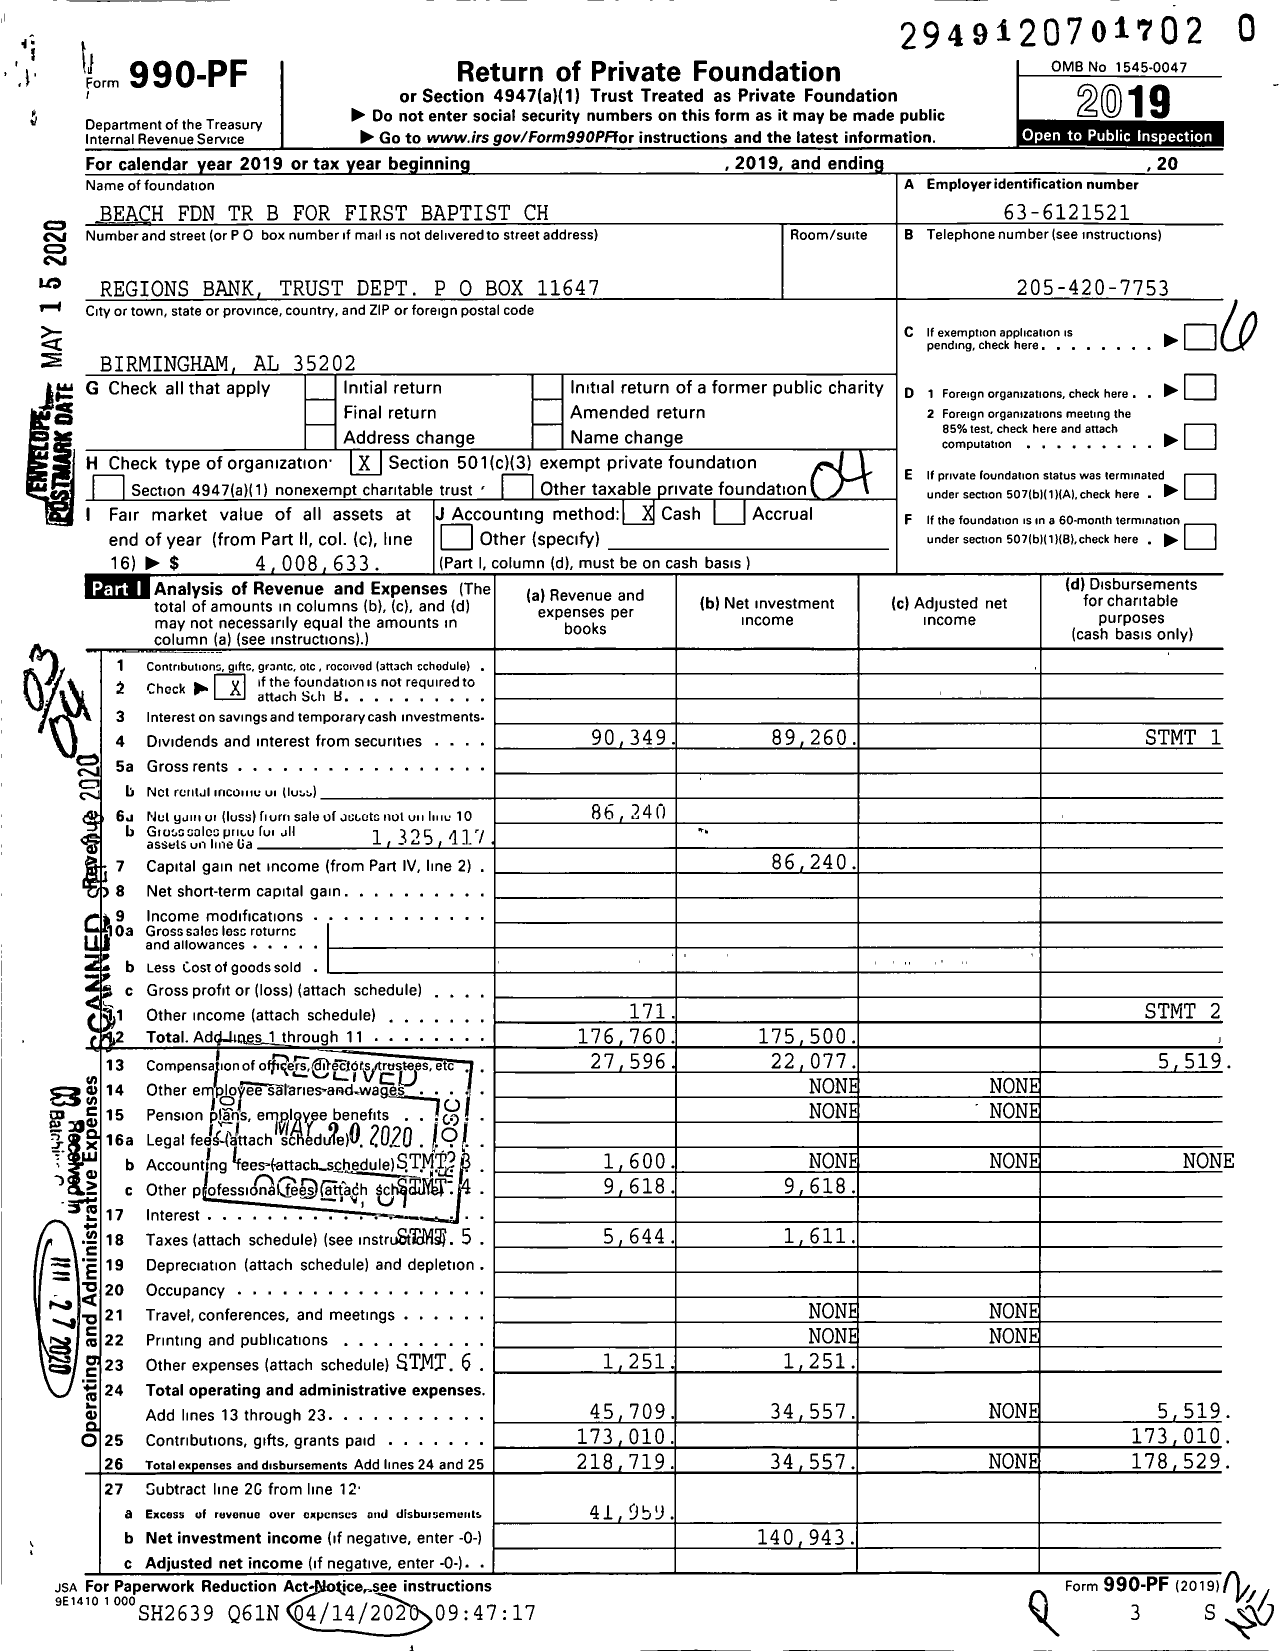 Image of first page of 2019 Form 990PR for Beach Foundation TR B for First Baptist CH